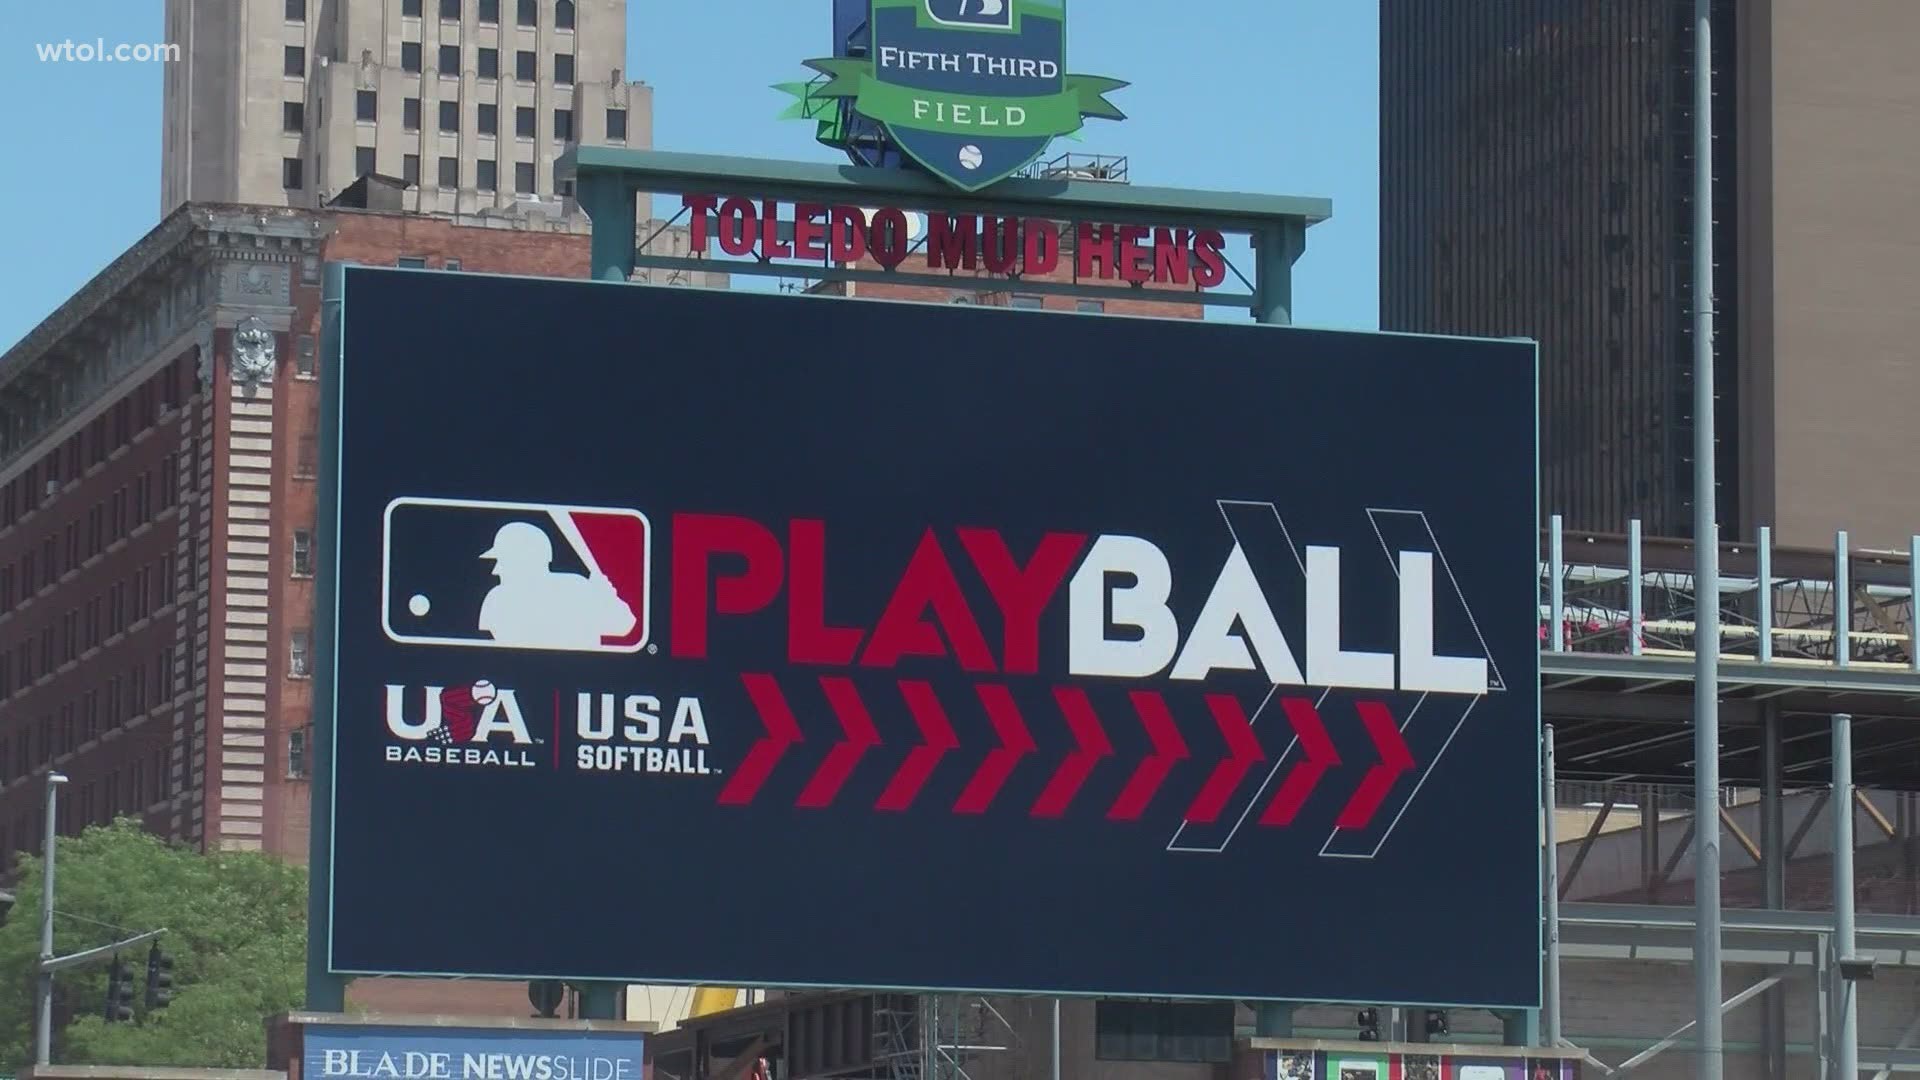 The MLB teamed up with the Mud Hens to host the free event in hopes of growing the game of baseball.